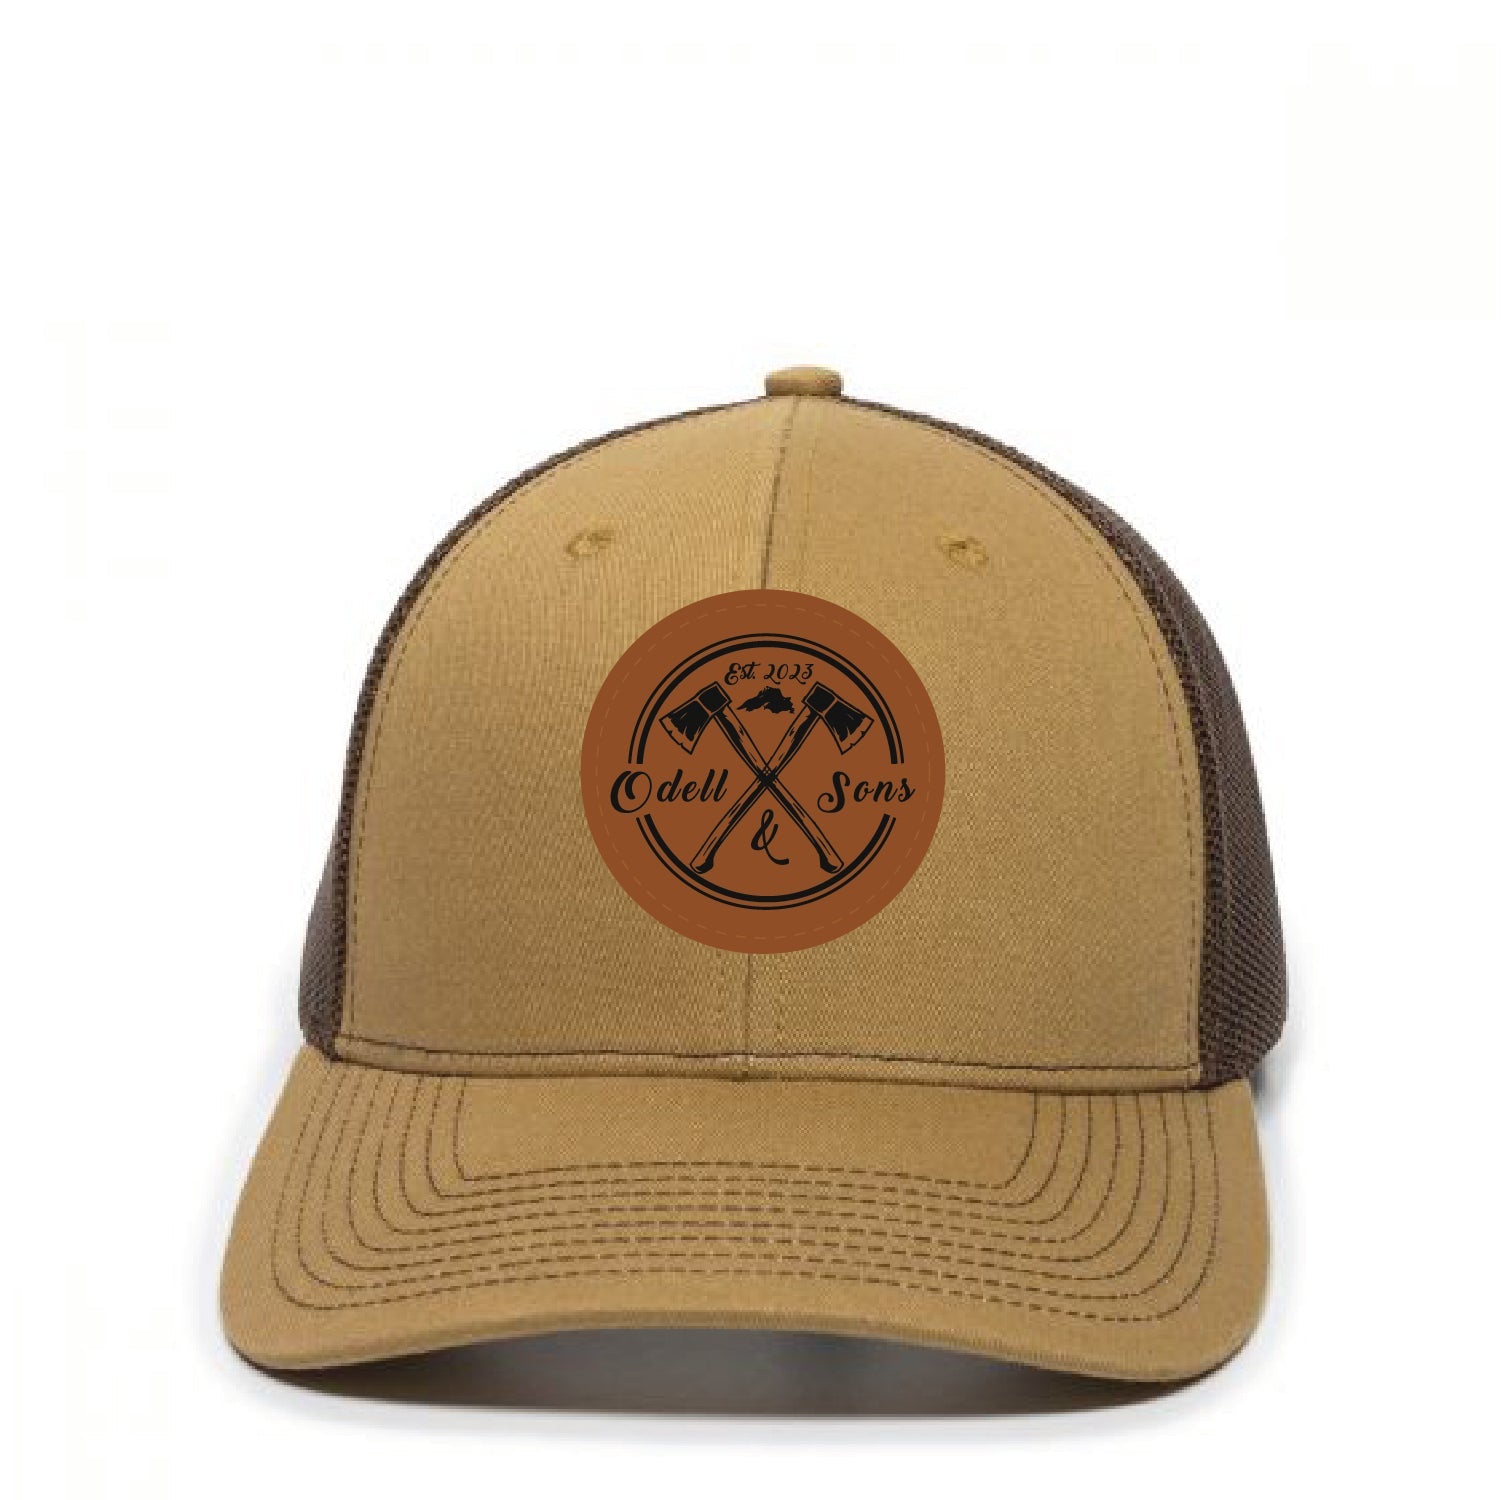 Odell and Sons Premium Trucker Hat - DSP On Demand